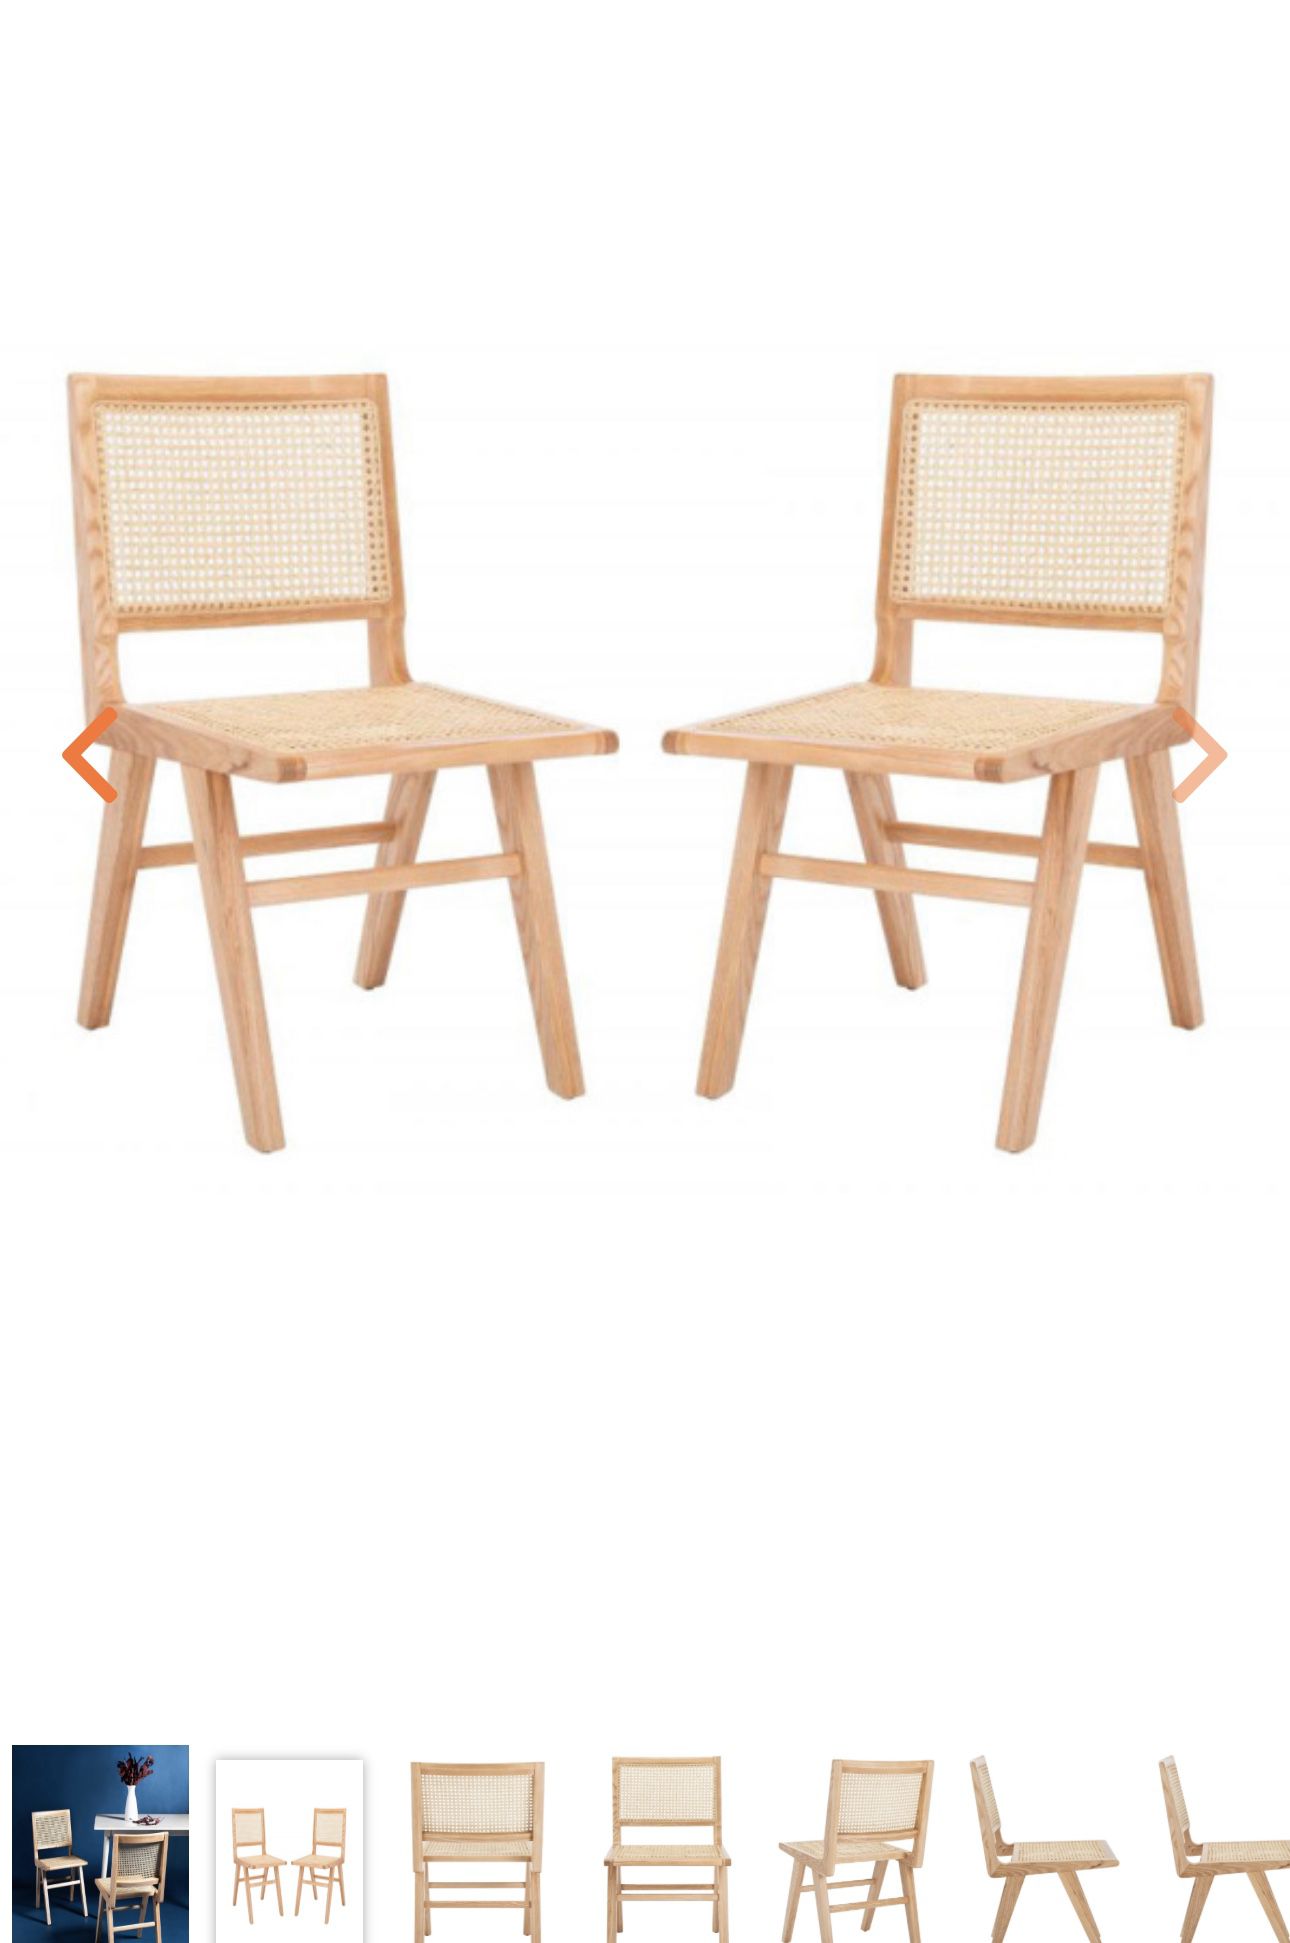 Safavieh Hattie French Cane Wicker Natural Dining Chairs 